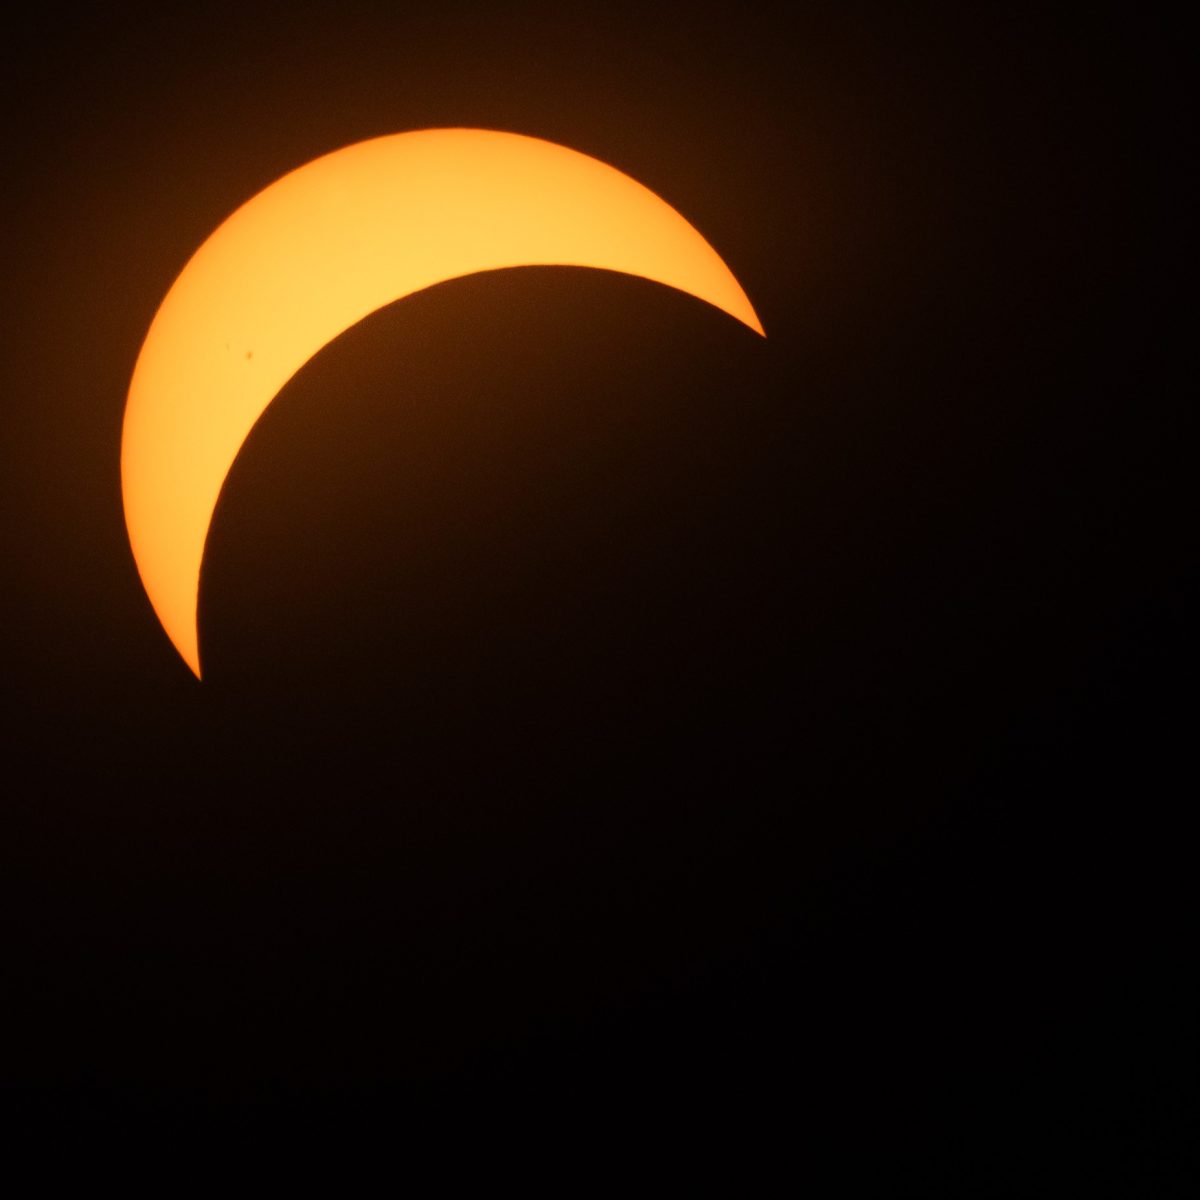 The solar eclipse from April 8, 2024.